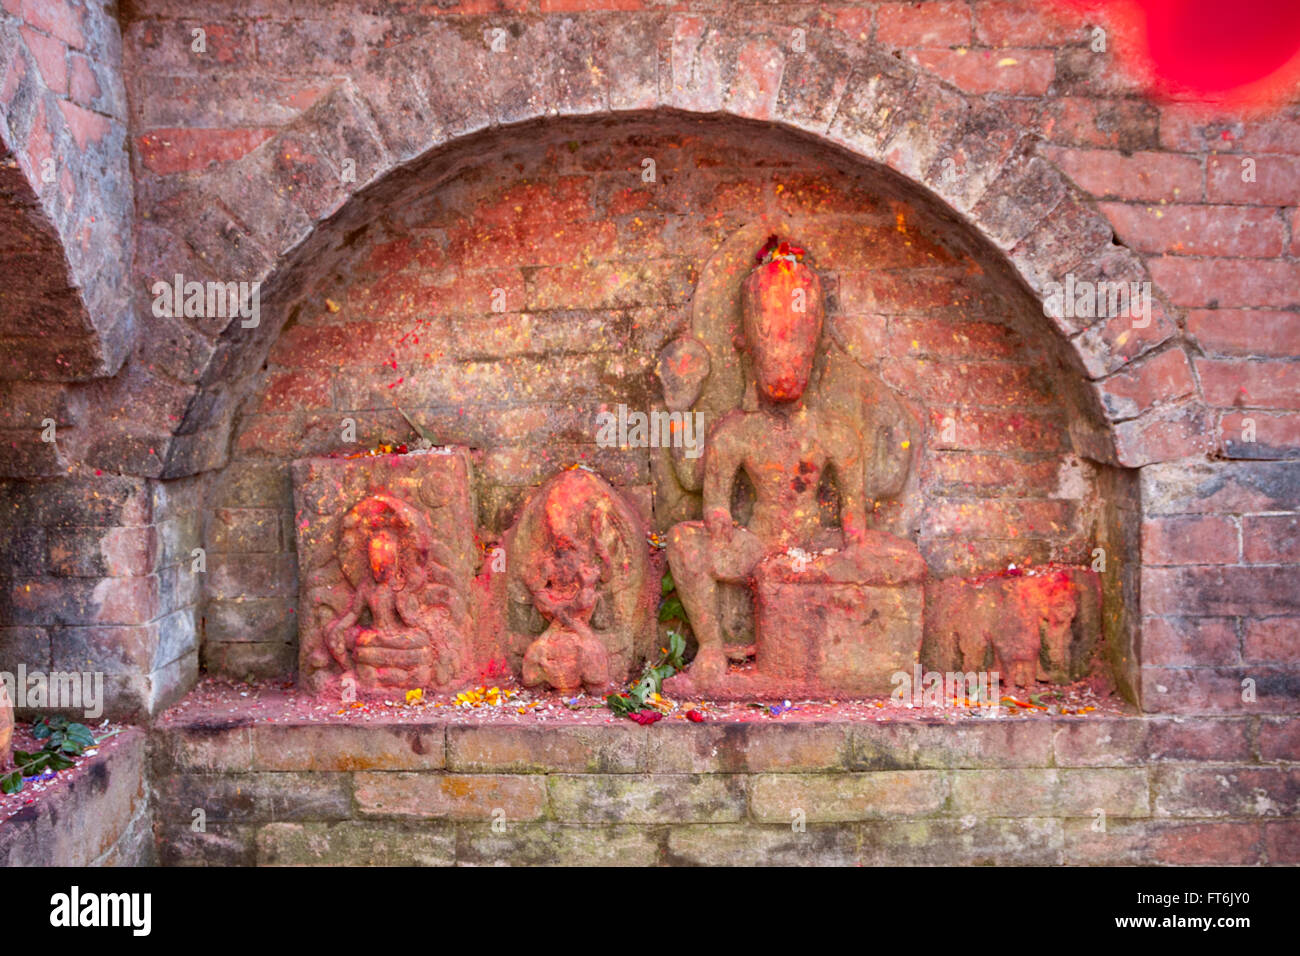 Nepal, Kathmandu.   Shrine Dated to the pre-Lichchhavi Period, probably 3rd. Century A.D.  Offerings of Rice and Flower Petals. Stock Photo